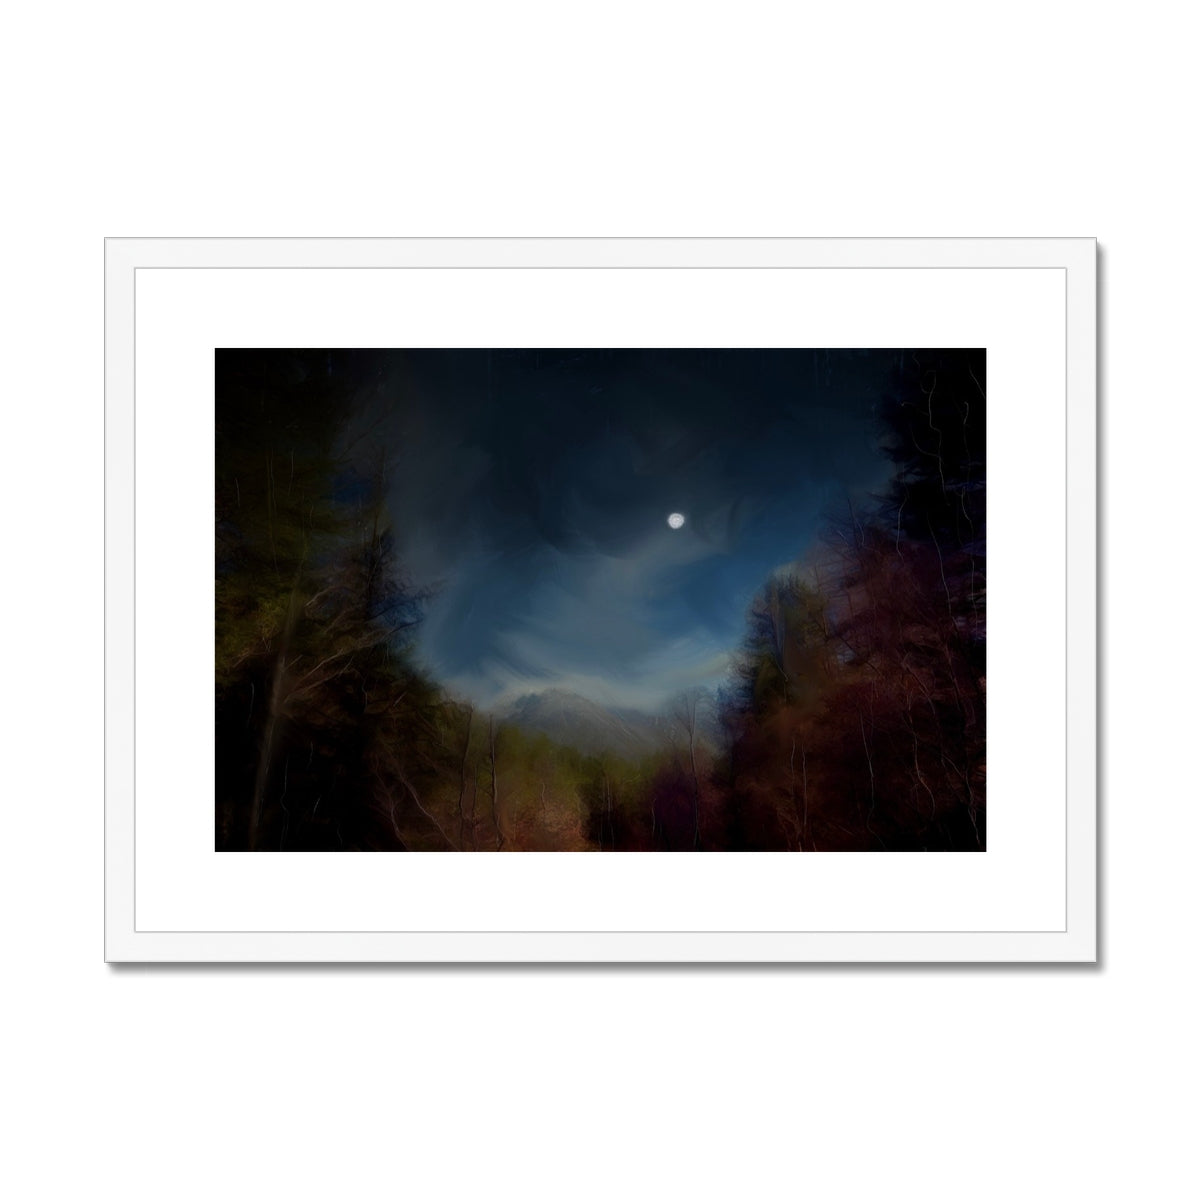 Glencoe Lochan Moonlight Painting | Framed & Mounted Prints From Scotland-Framed & Mounted Prints-Scottish Lochs & Mountains Art Gallery-A2 Landscape-White Frame-Paintings, Prints, Homeware, Art Gifts From Scotland By Scottish Artist Kevin Hunter